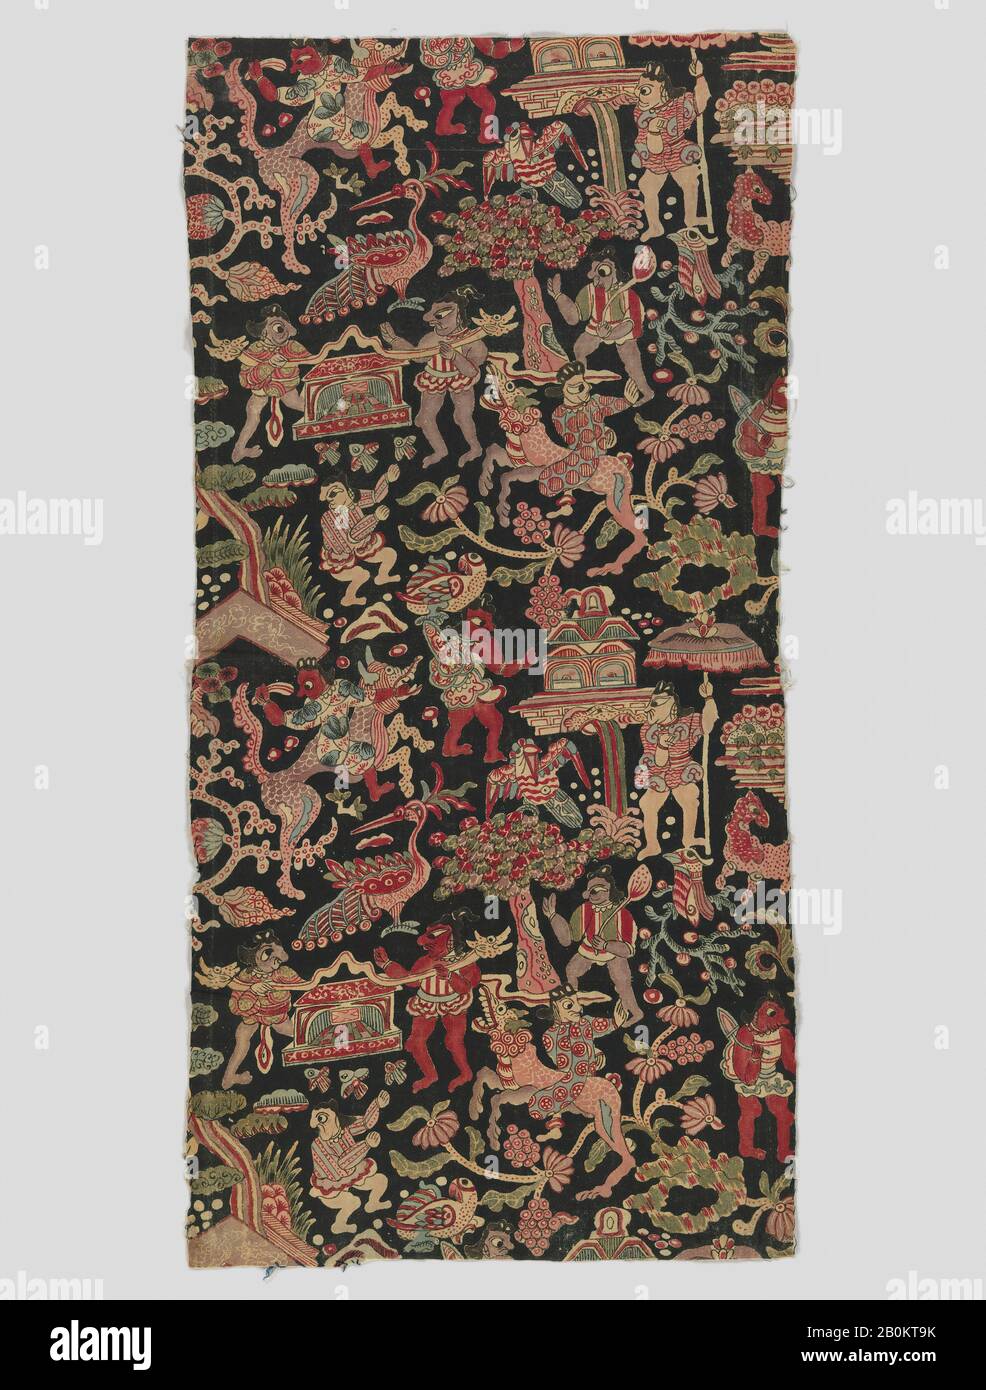 Sarasa with Figures, Birds, and Fantastic Animals, India (Coromandel Coast), for the Japanese market, late 17th–early 18th century, India (Coromandel Coast), for the Japanese market, Cotton (painted resist and mordant, dyed), Overall: 27 1/2 x 13 3/4 in. (69.9 x 34.9 cm), Textiles Stock Photo